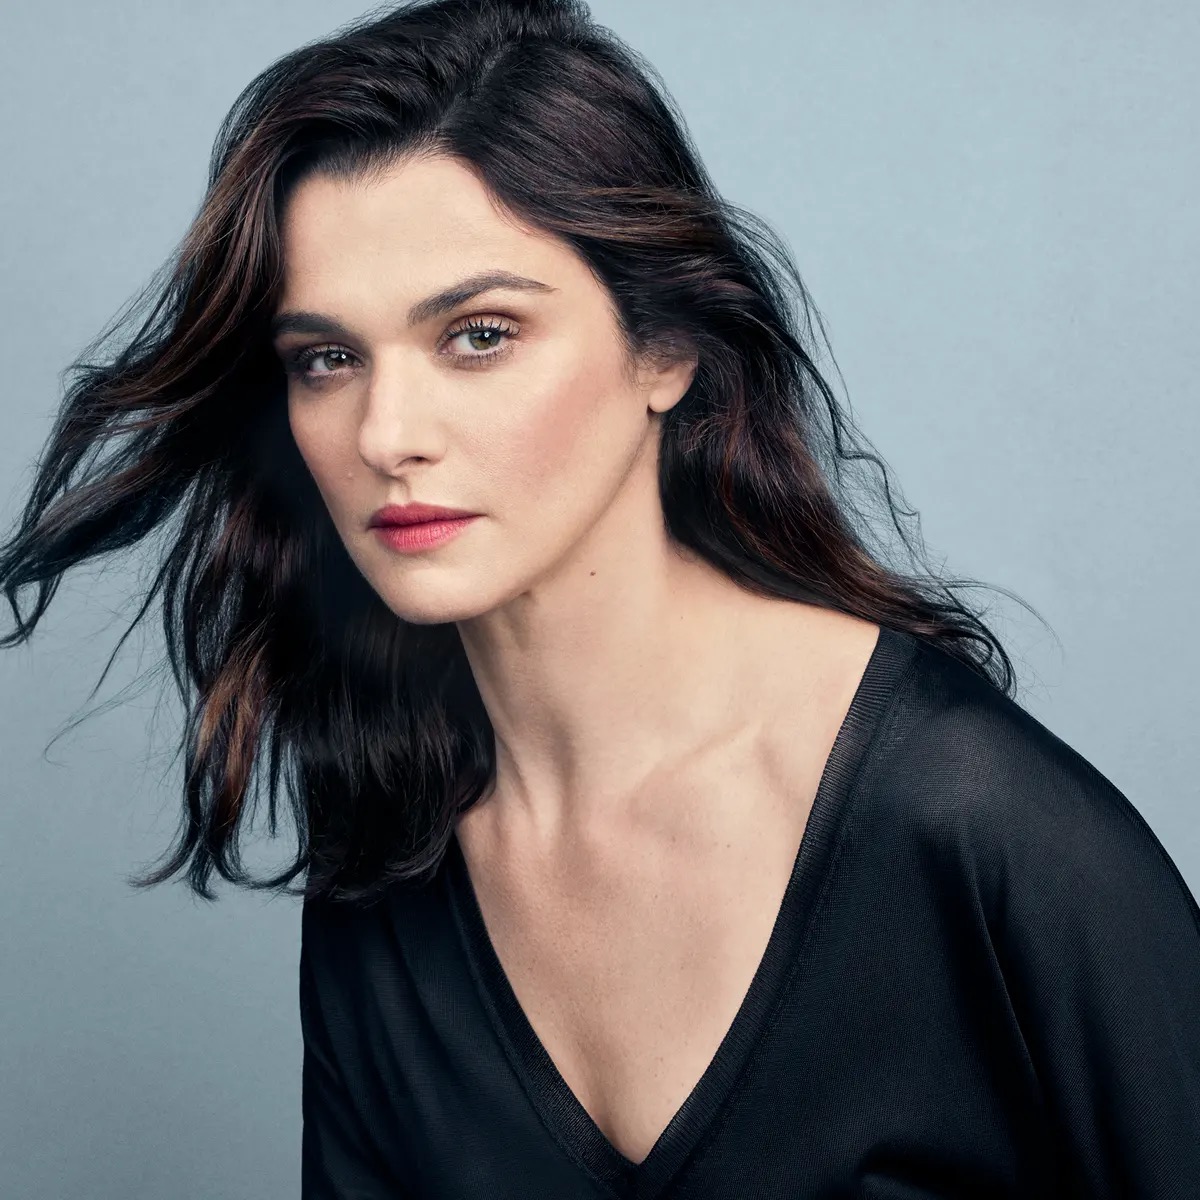 If You Get 16/25 on This Random Knowledge Quiz, You Know Something About Every Subject Rachel Weisz